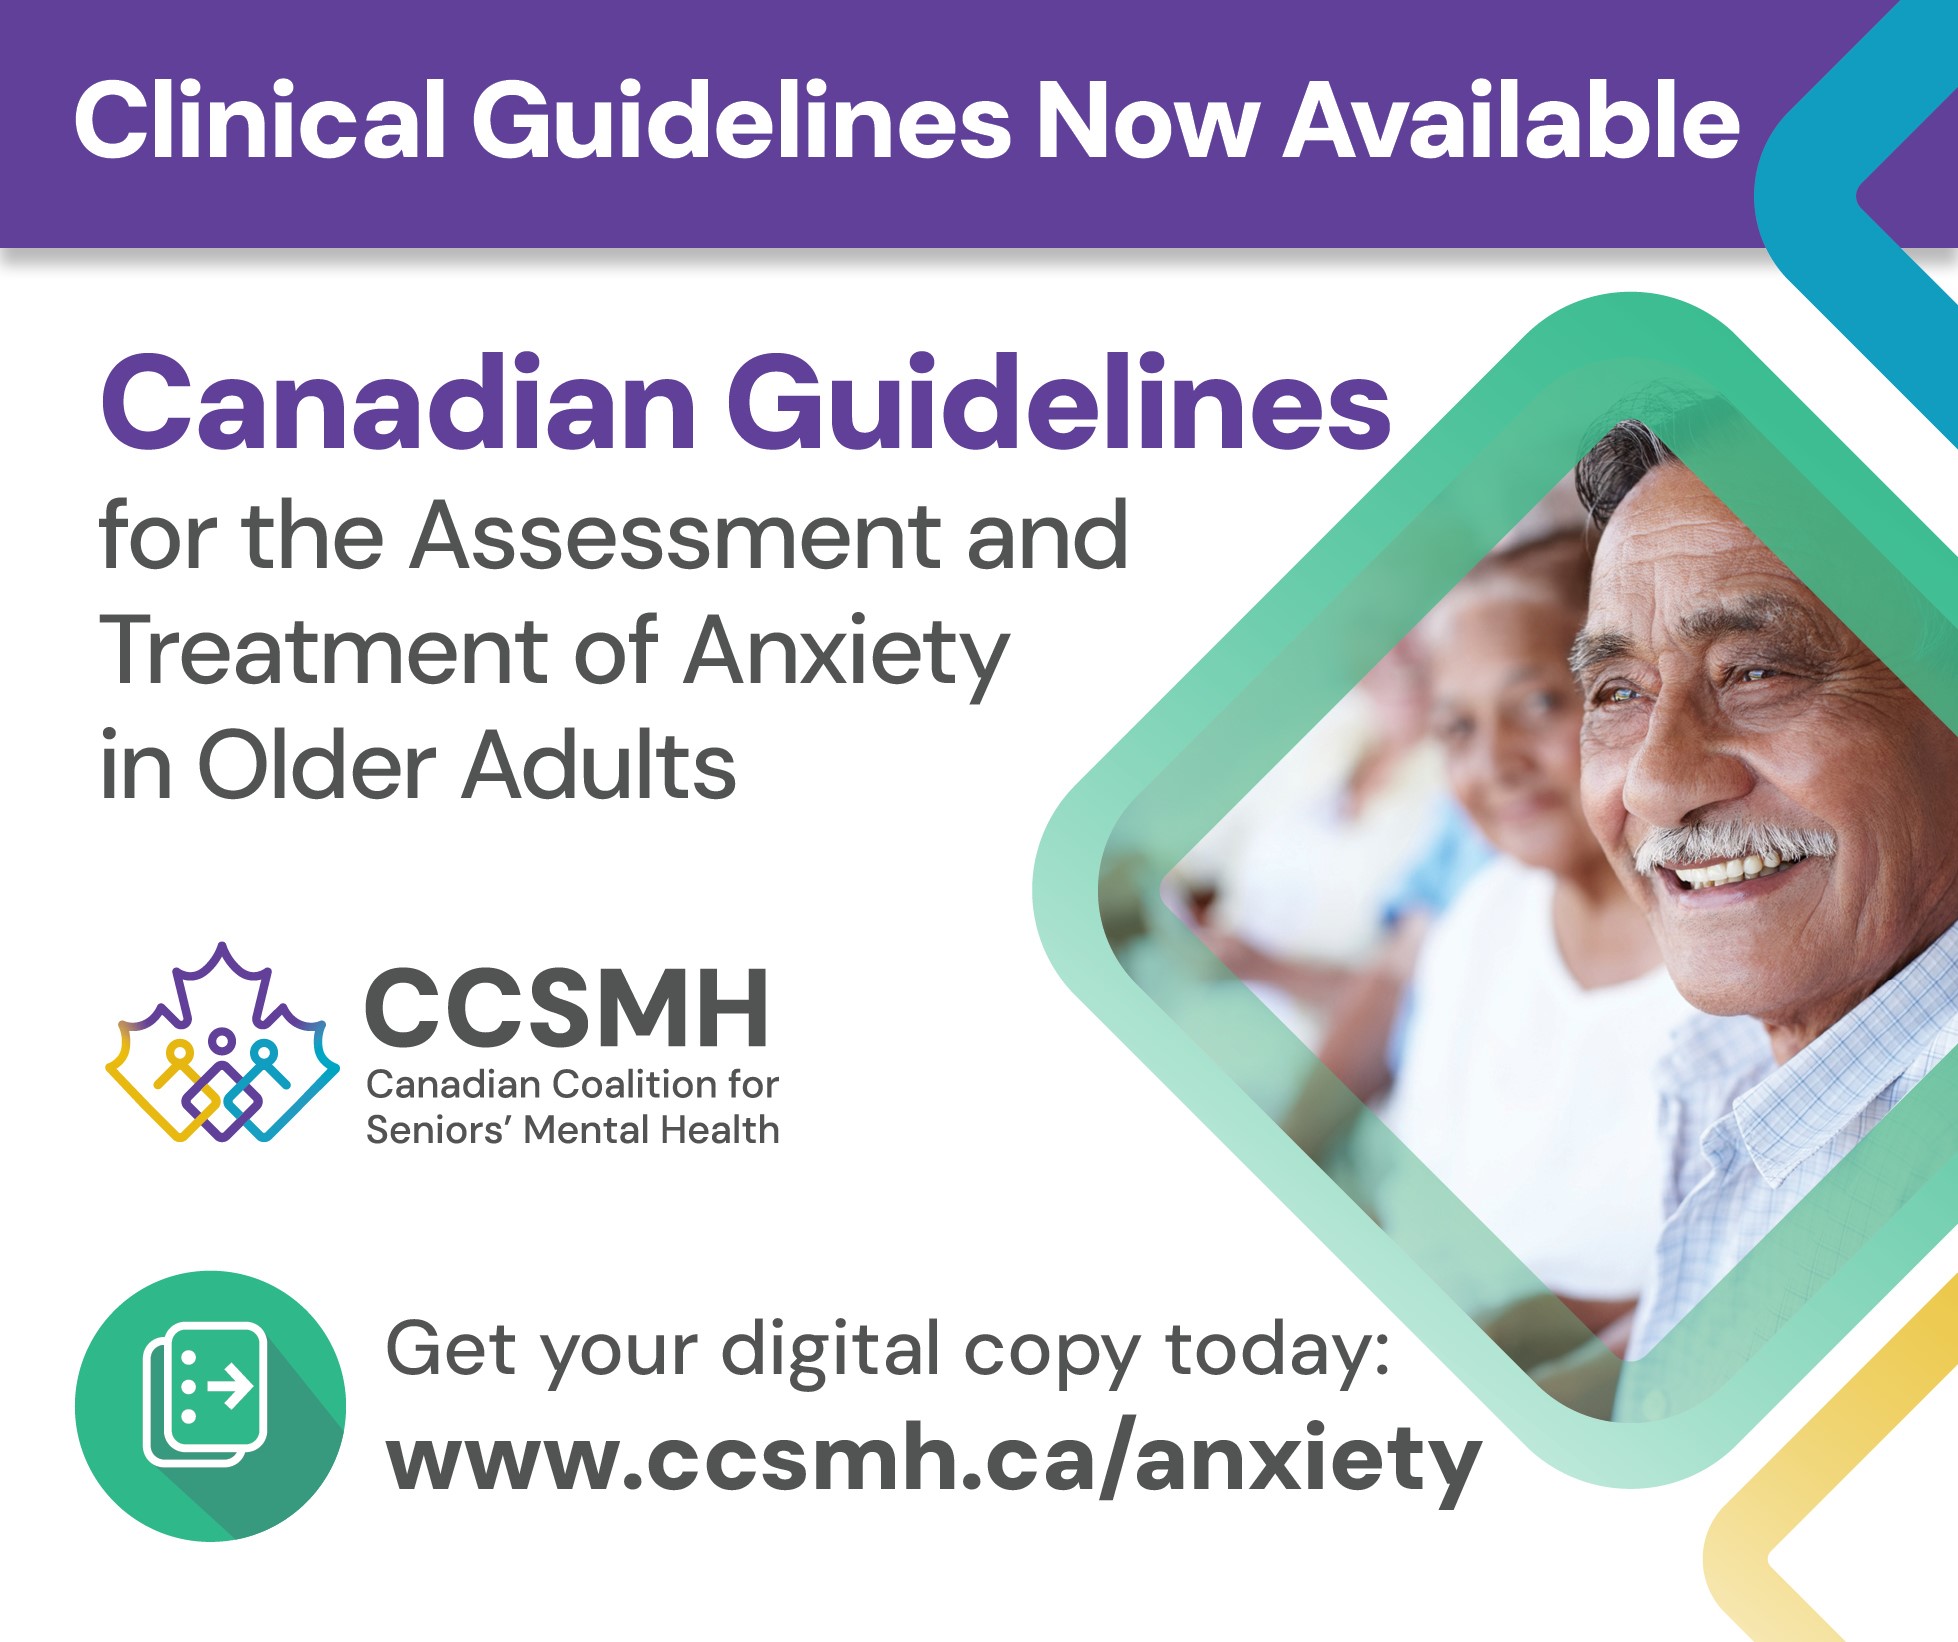 Now available: Canadian Guidelines on assessment and treatment of anxiety in older adults